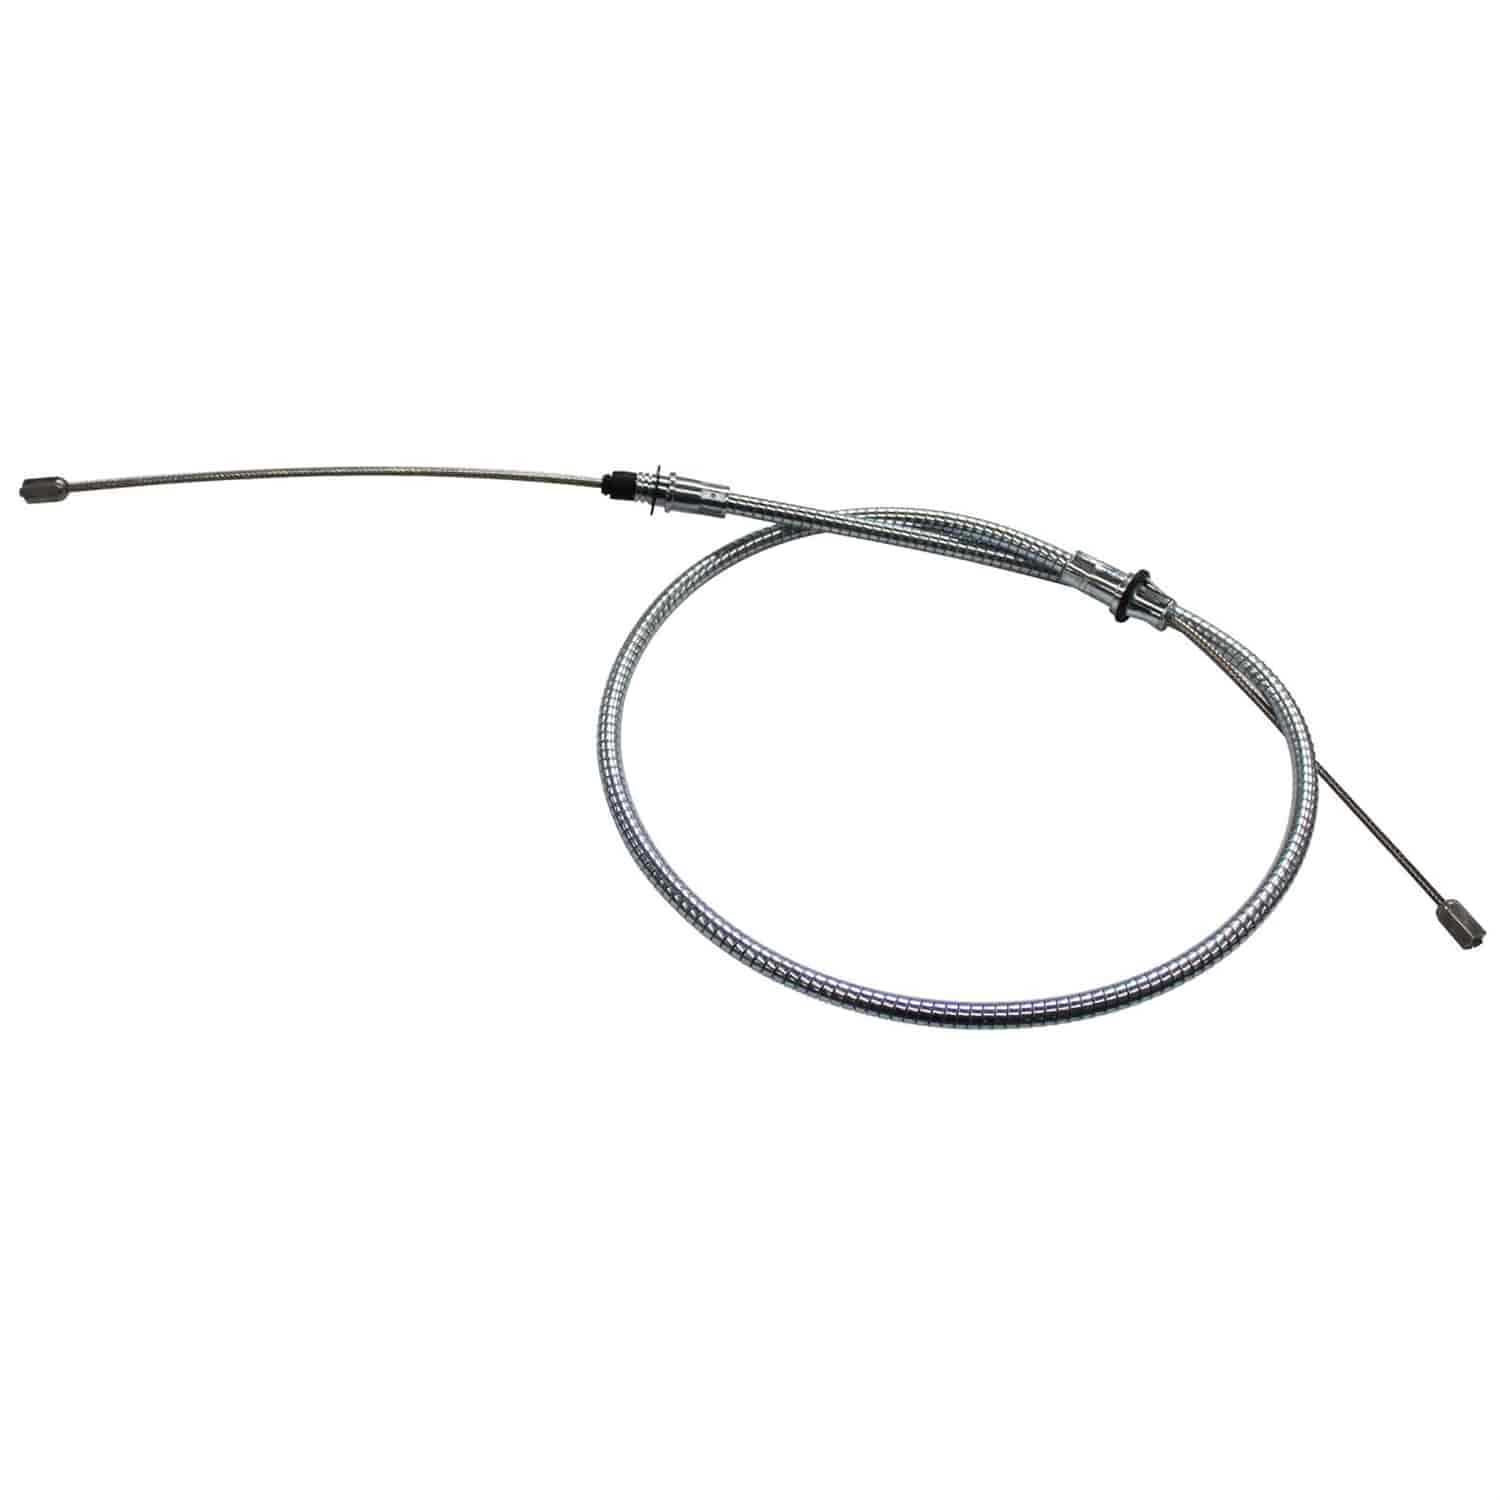 Parking Brake Cable for 1982-1987 Chevy Camaro